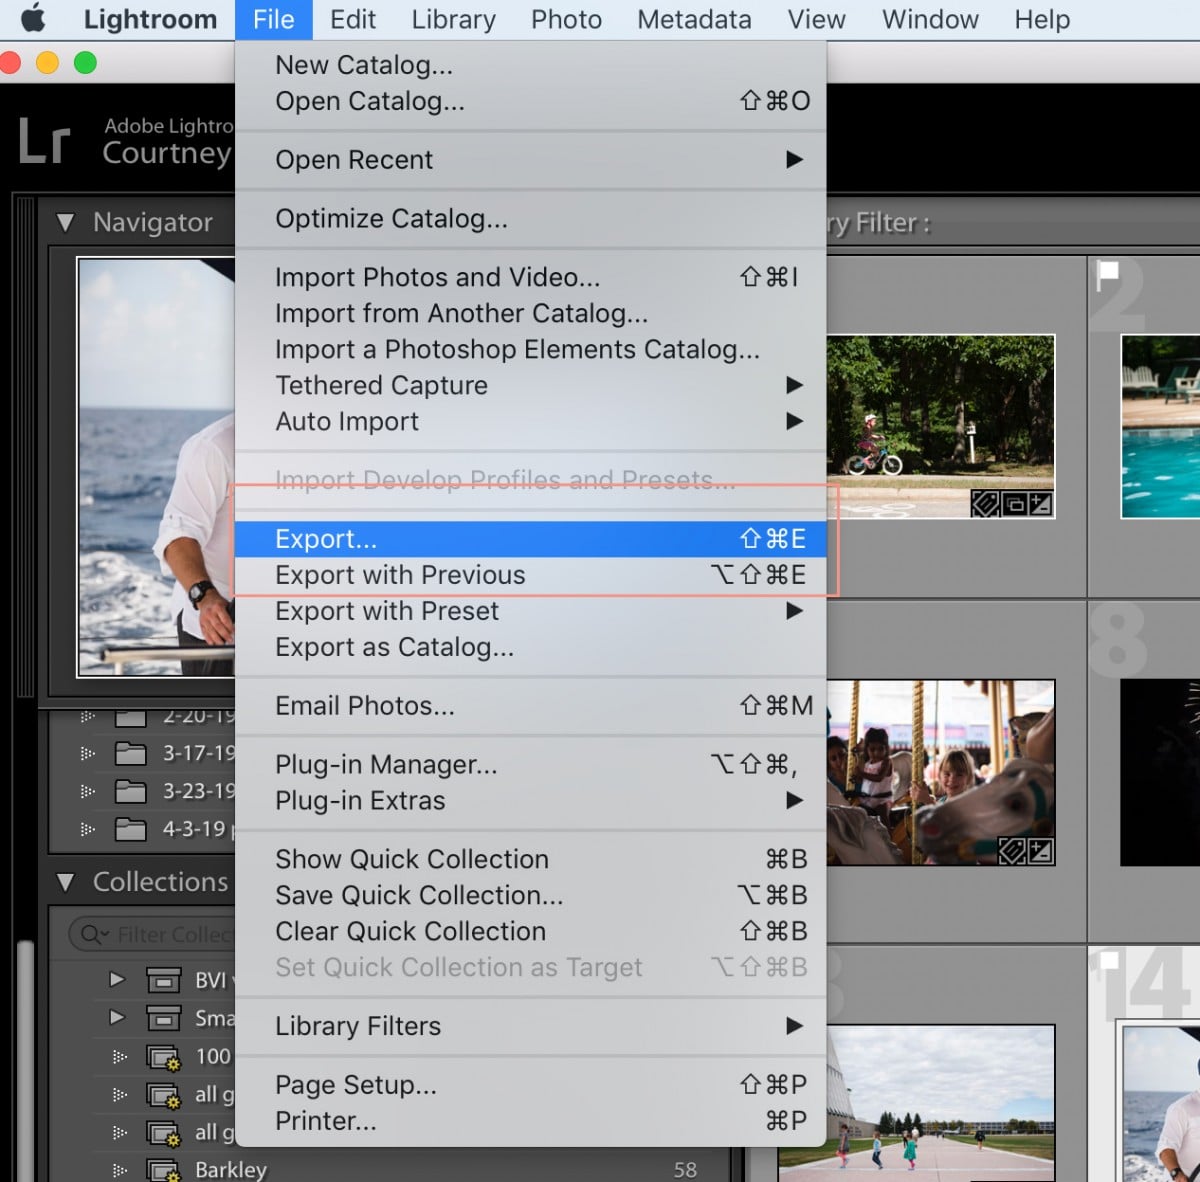 EXACT Lightroom Export Settings Every Photographer Should Know